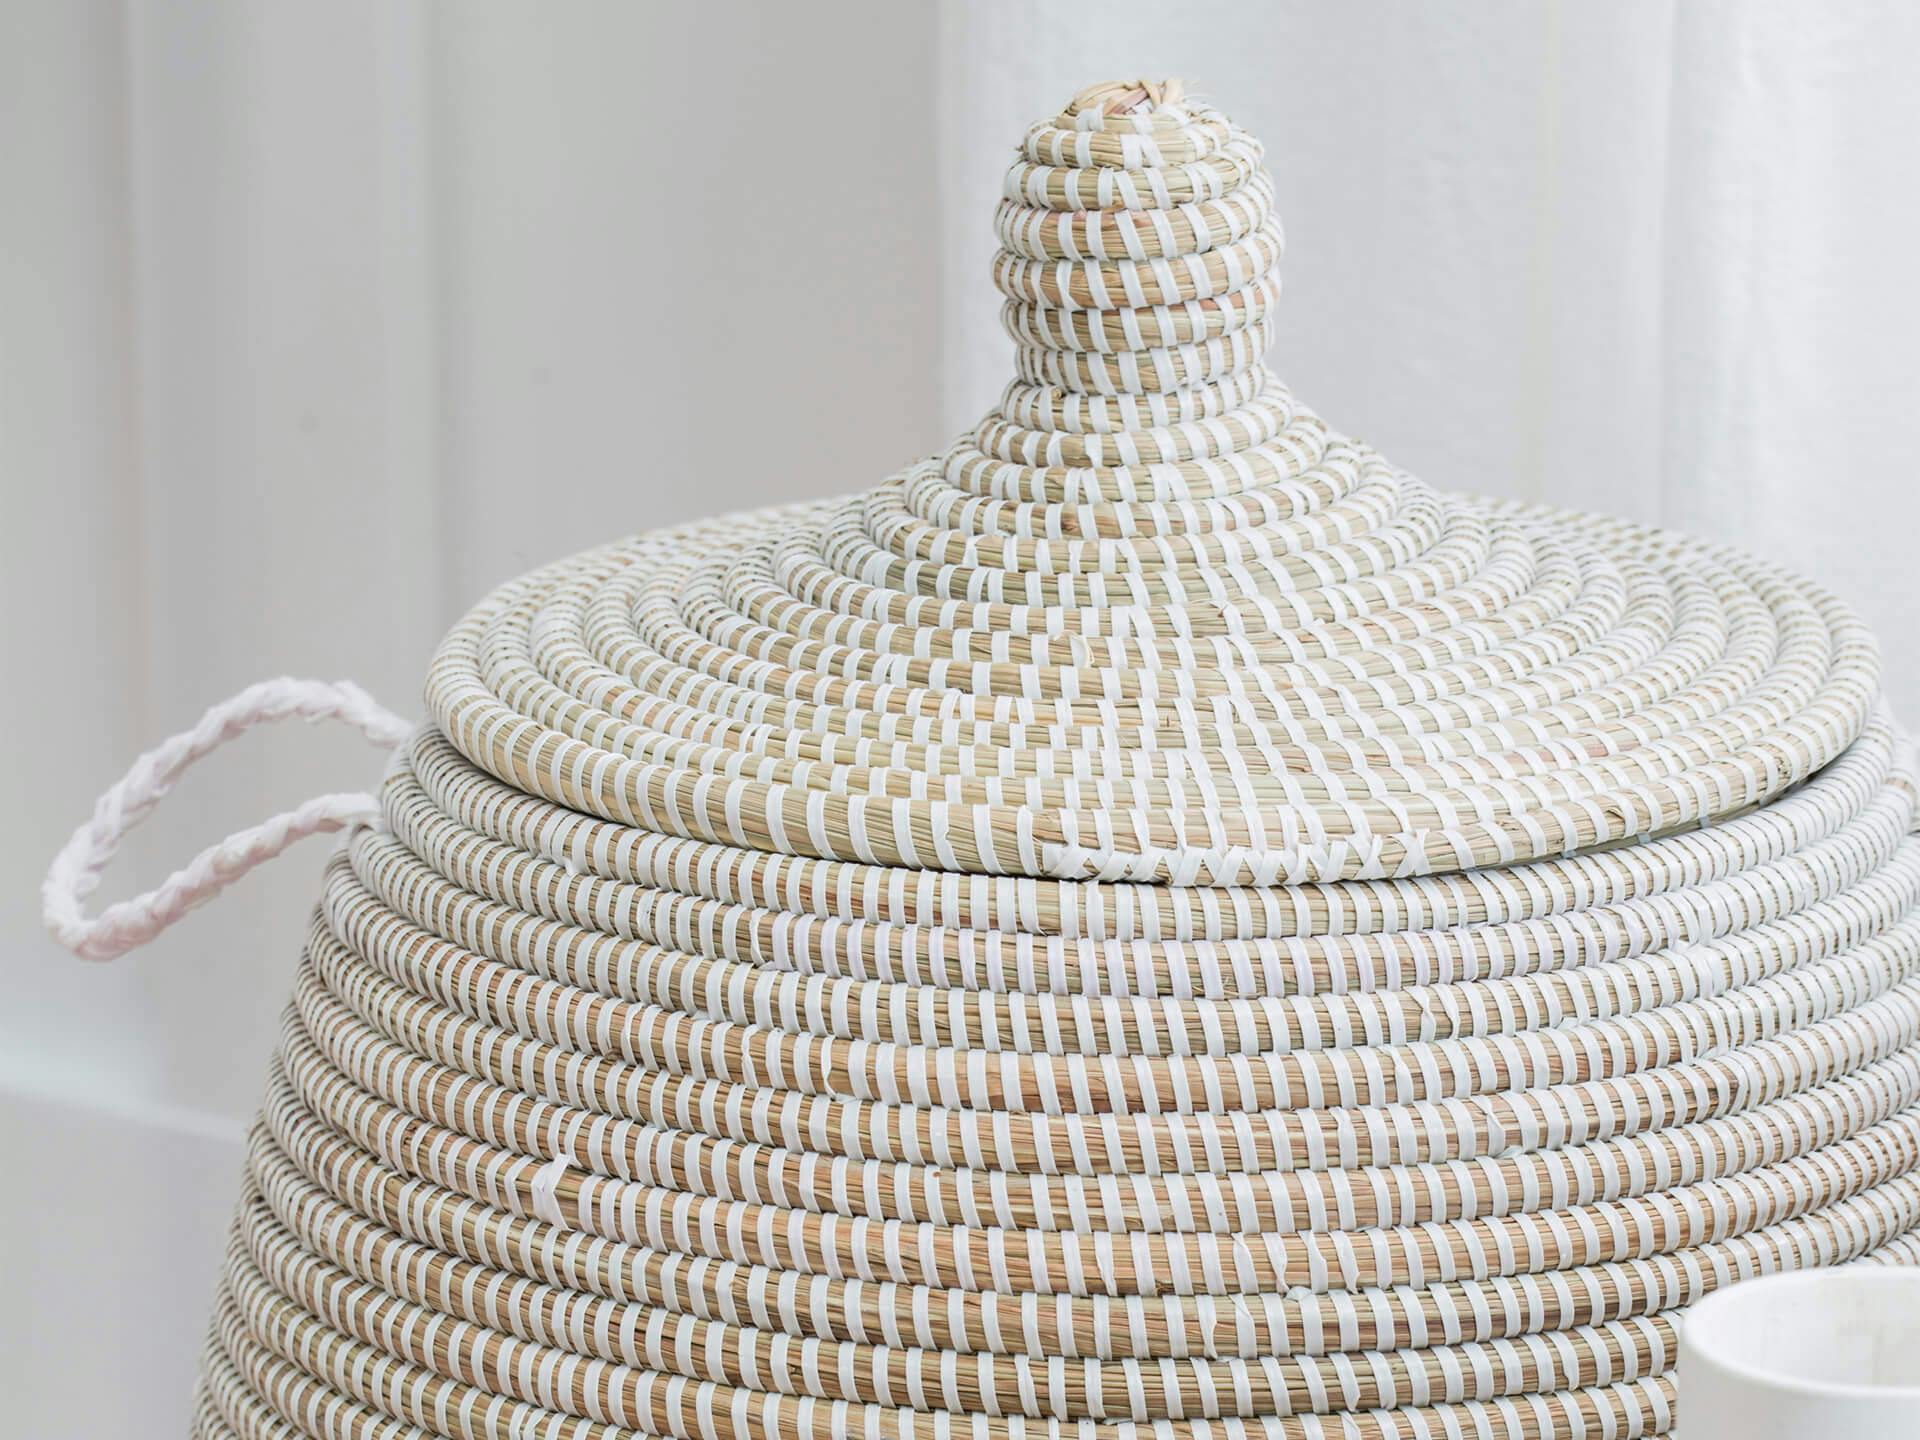 Upper portion of a woven white basket